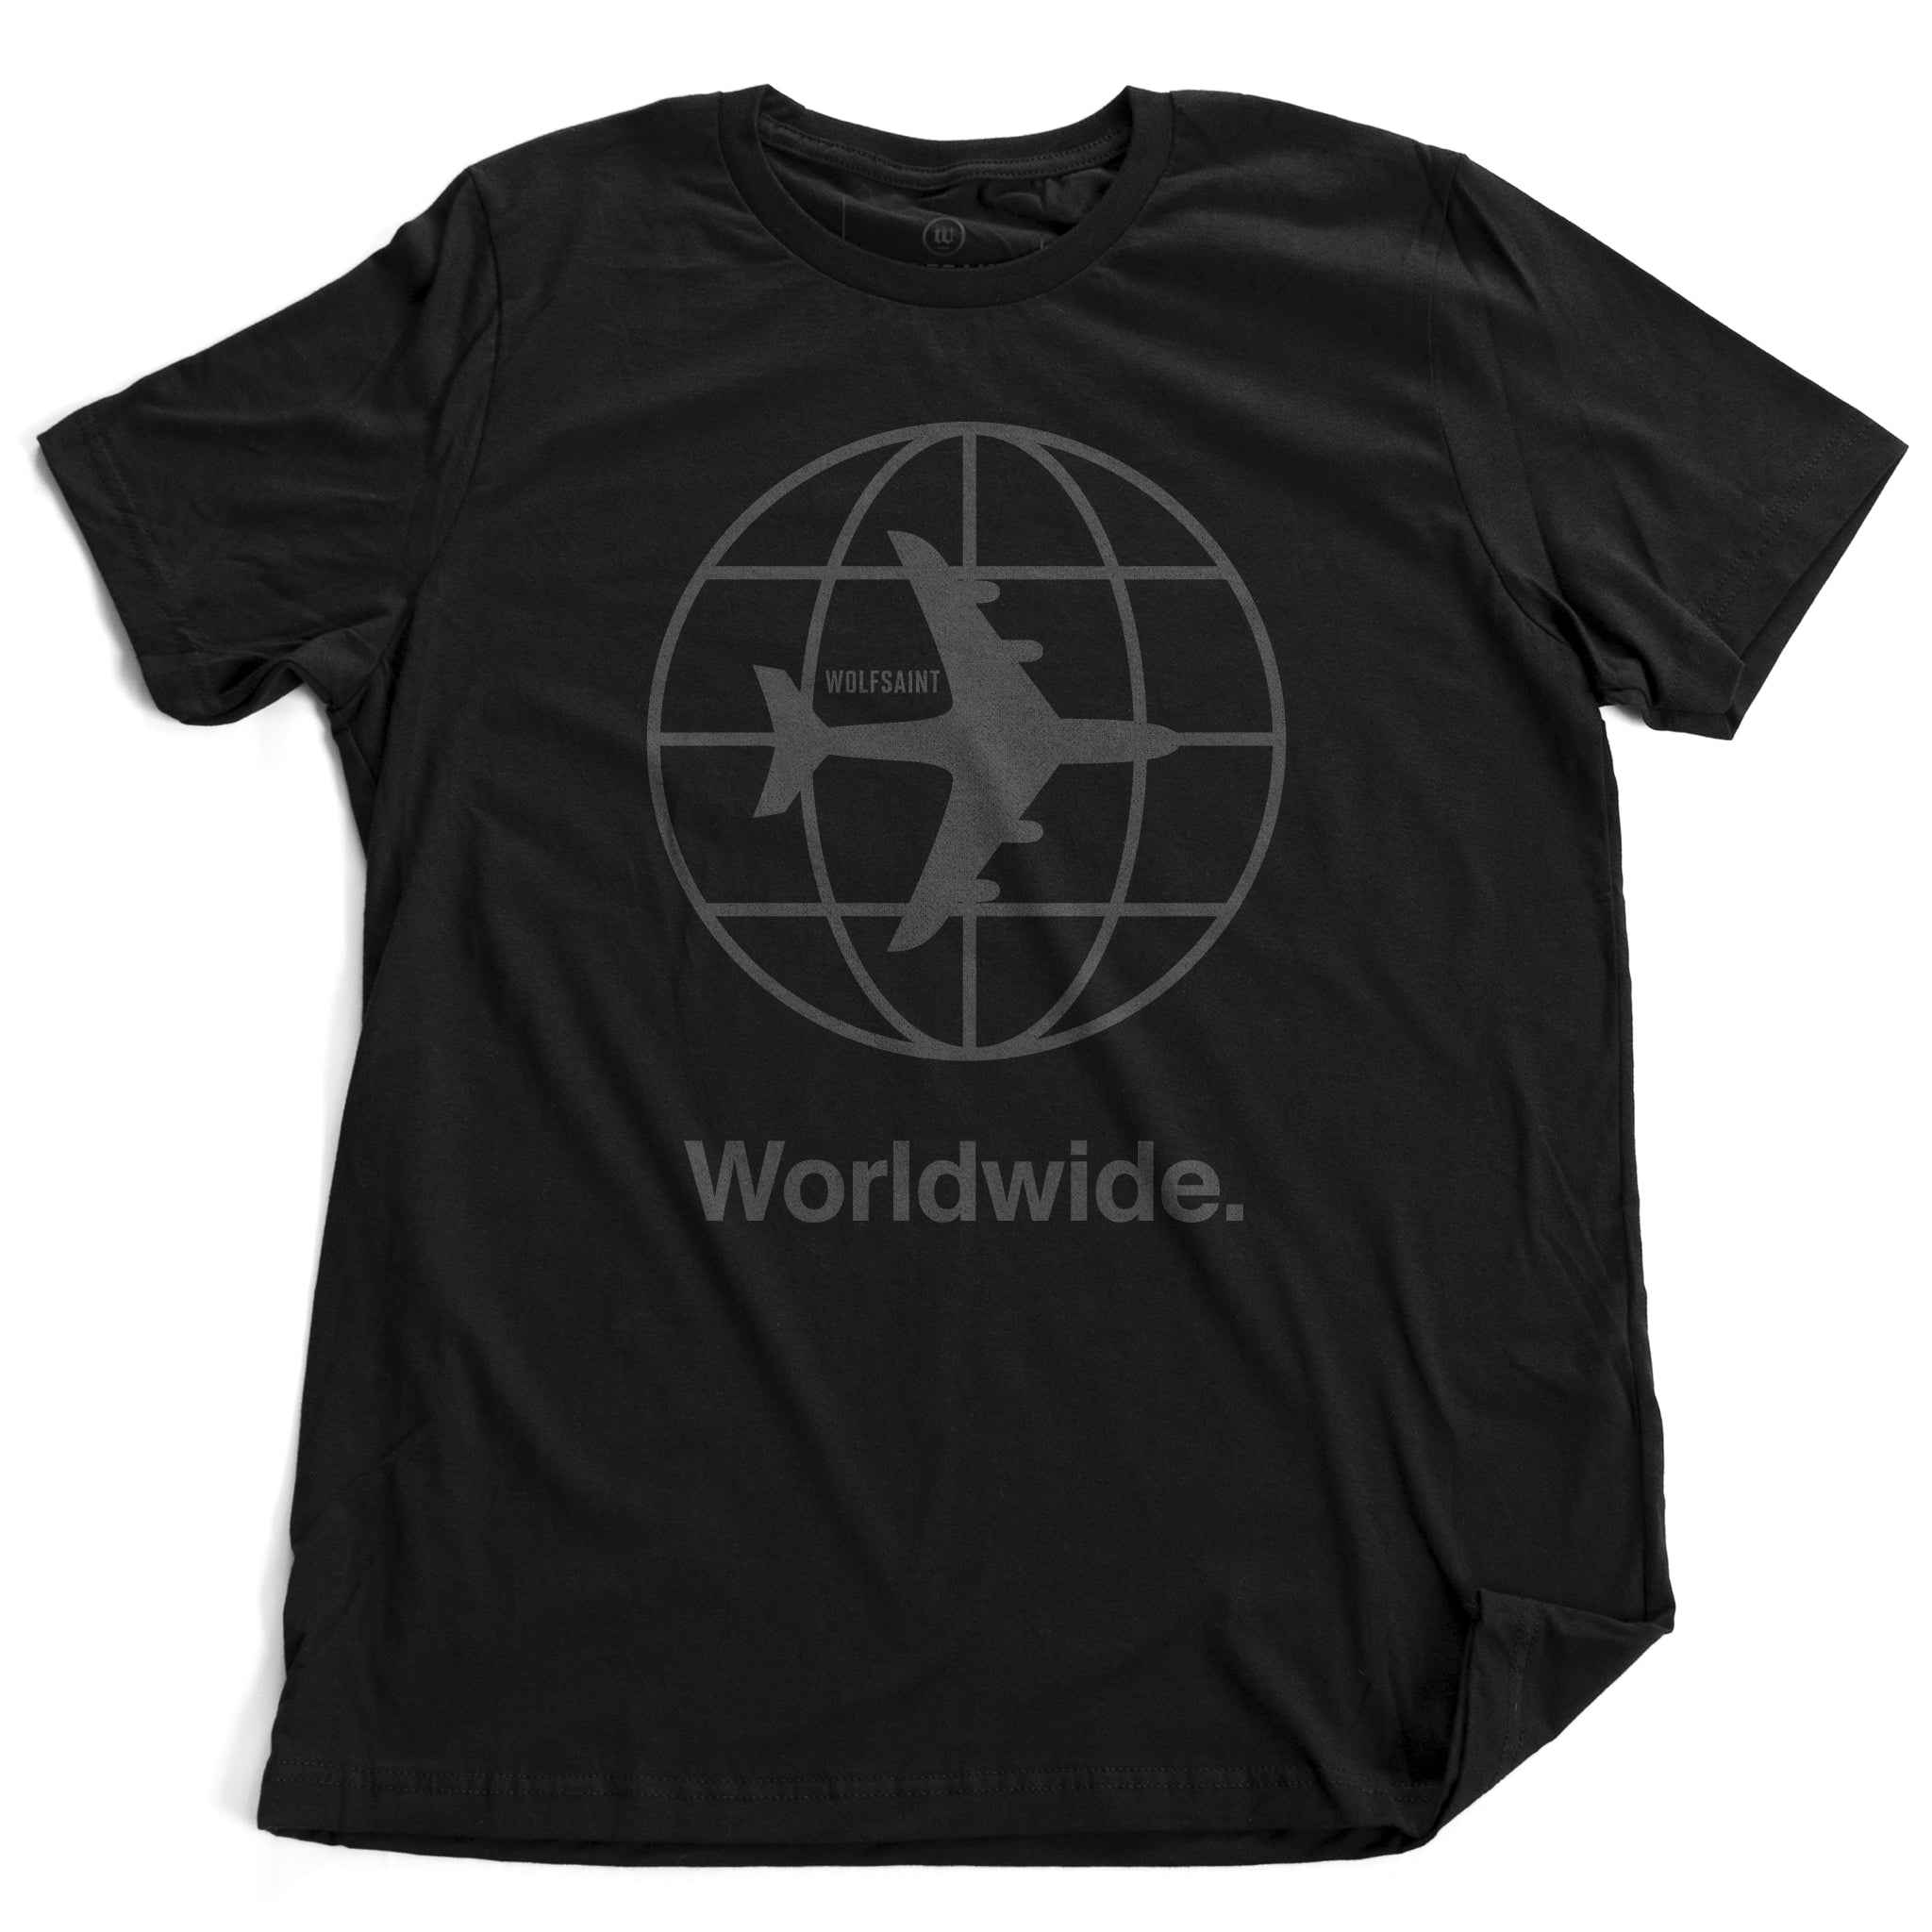 The front and back of the black version of a fashion t-shirt representing a jetsetting lifestyle. On the front of the shirts is a simple graphic of a commercial airliner superimposed on a globe, and the word “Worldwide.” On the reverse is a stack of airport codes representing international travel (New York/JFK, Los Angeles/LAX; Rio de Janeiro/GIG; San Jose Costa Rica/SJO; Tokyo/NRT; Paris/CDG). By fashion brand WOLFSAINT, from wolfsaint.net